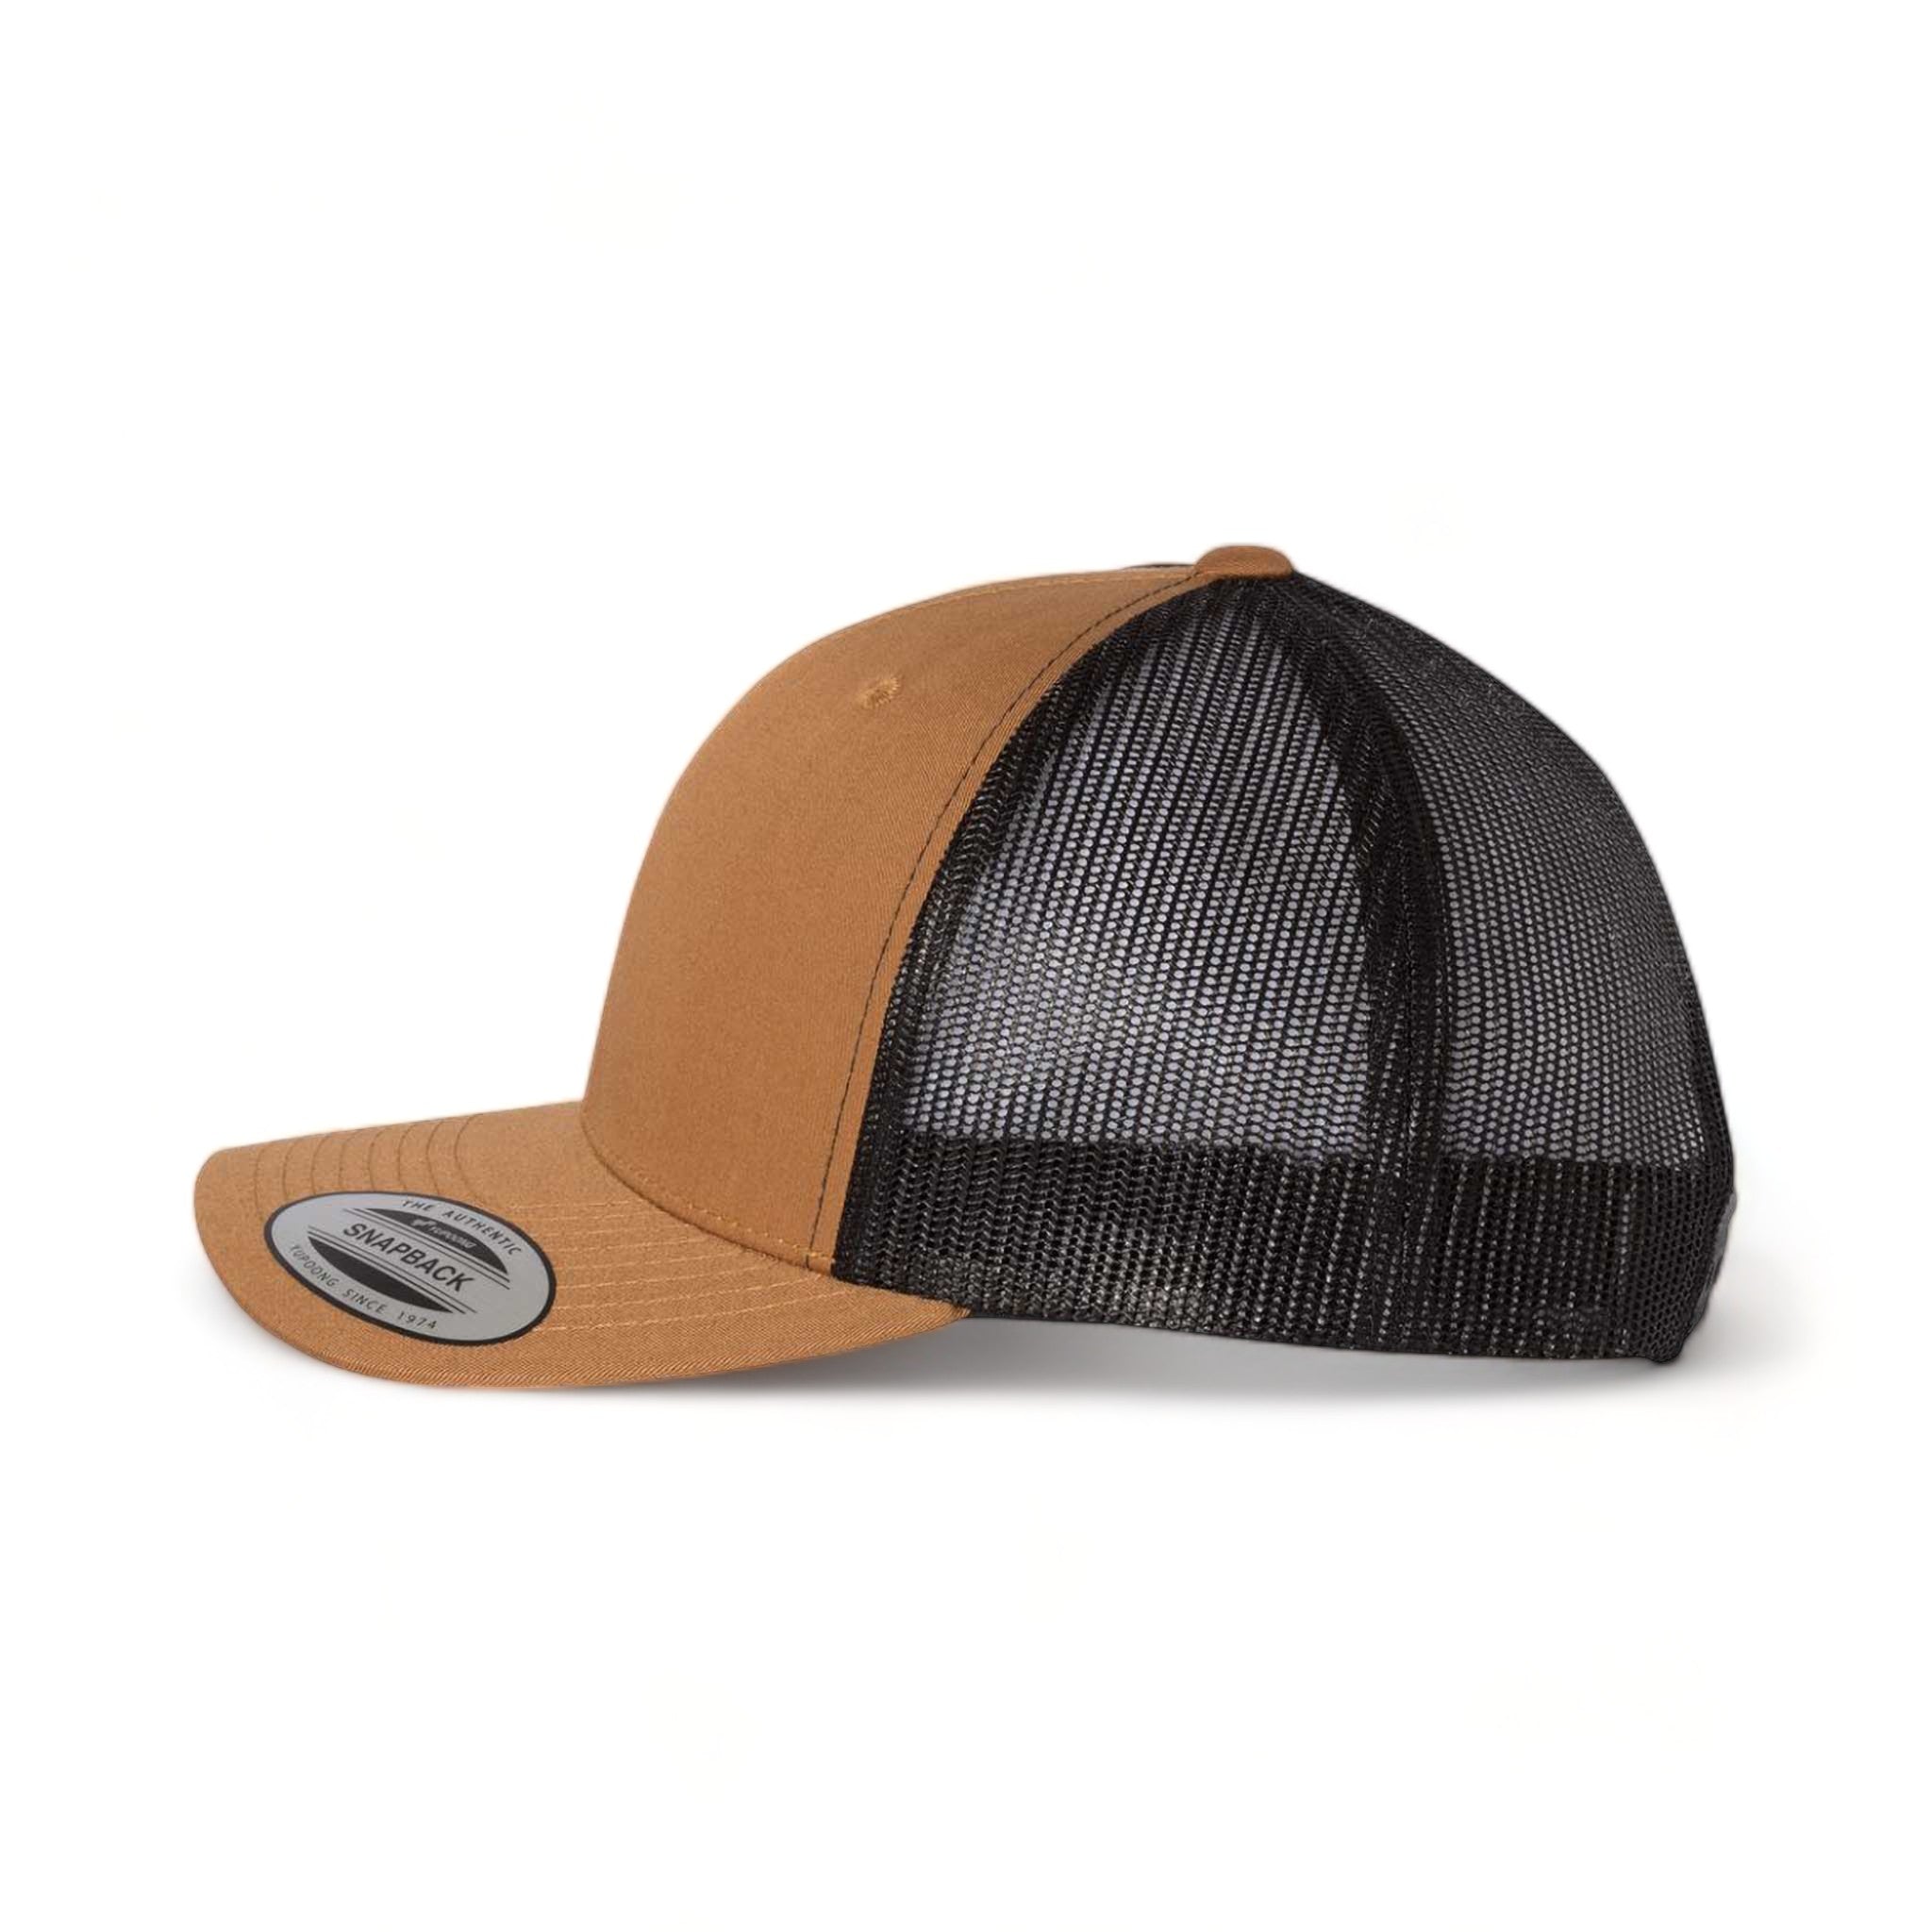 Side view of YP Classics 6606 custom hat in caramel and black